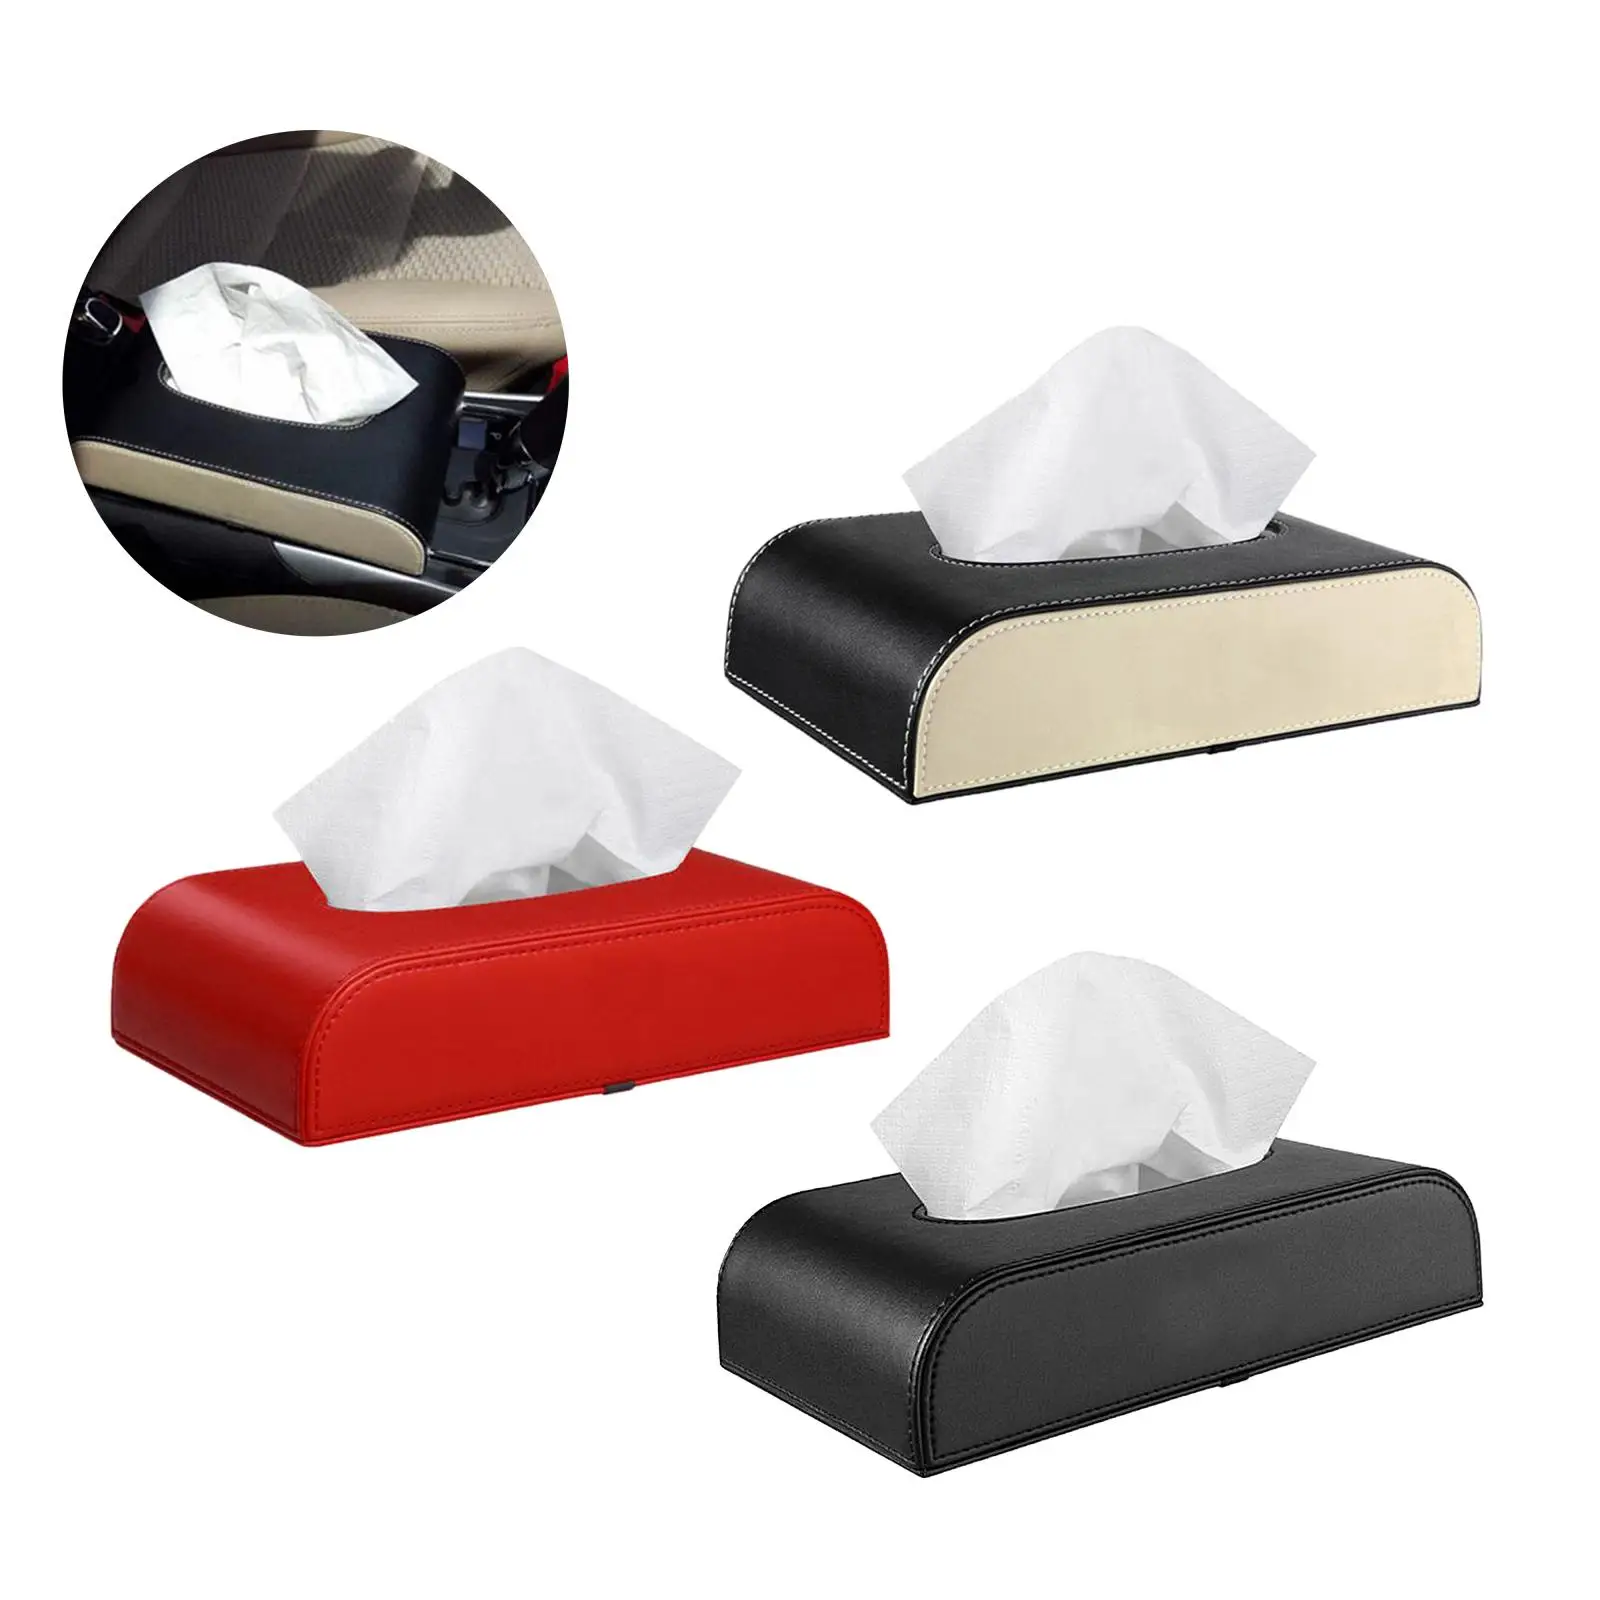 PU Leather Tissue Box Holder, Rectangular Napkin Holder Pumping Paper Case for Home Office Car Automotive Decoration